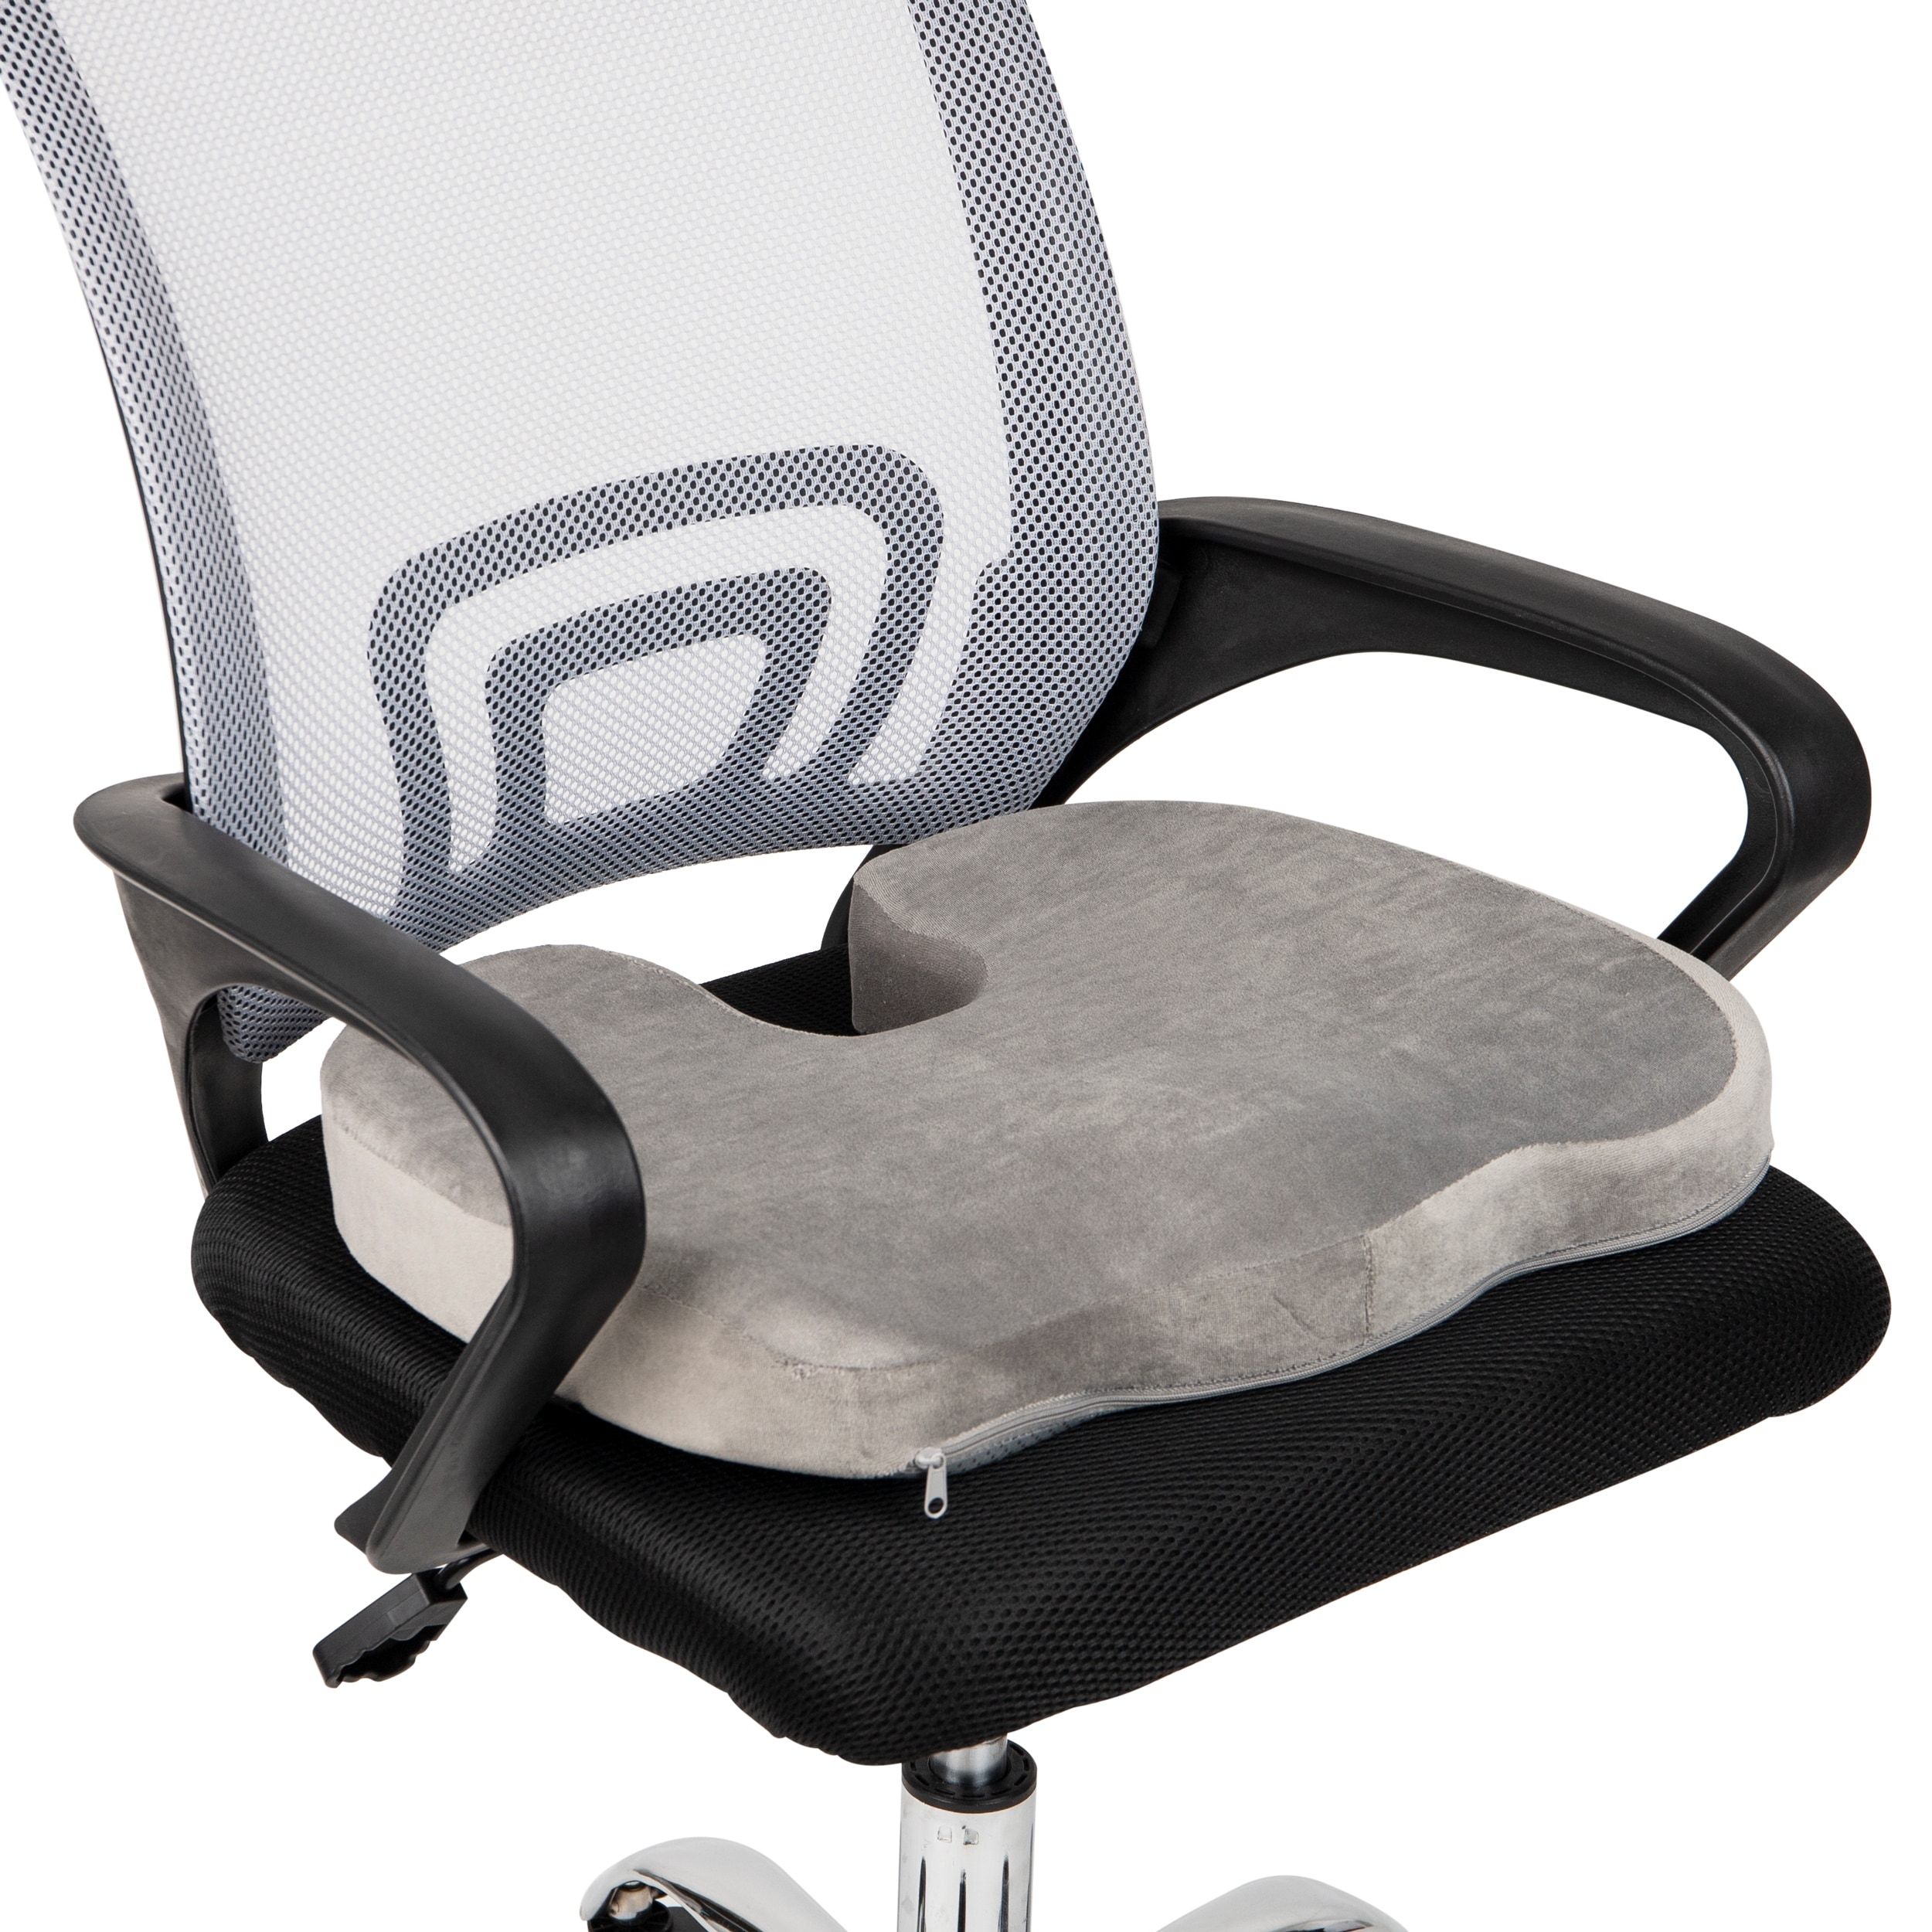 https://ak1.ostkcdn.com/images/products/is/images/direct/c1fee635dca0059e63faaa5824acca699de429bf/Mind-Reader-Harmony-Collection%2C-Orthopedic-Seat-Cushion%2C-Ergonomic-Design.jpg